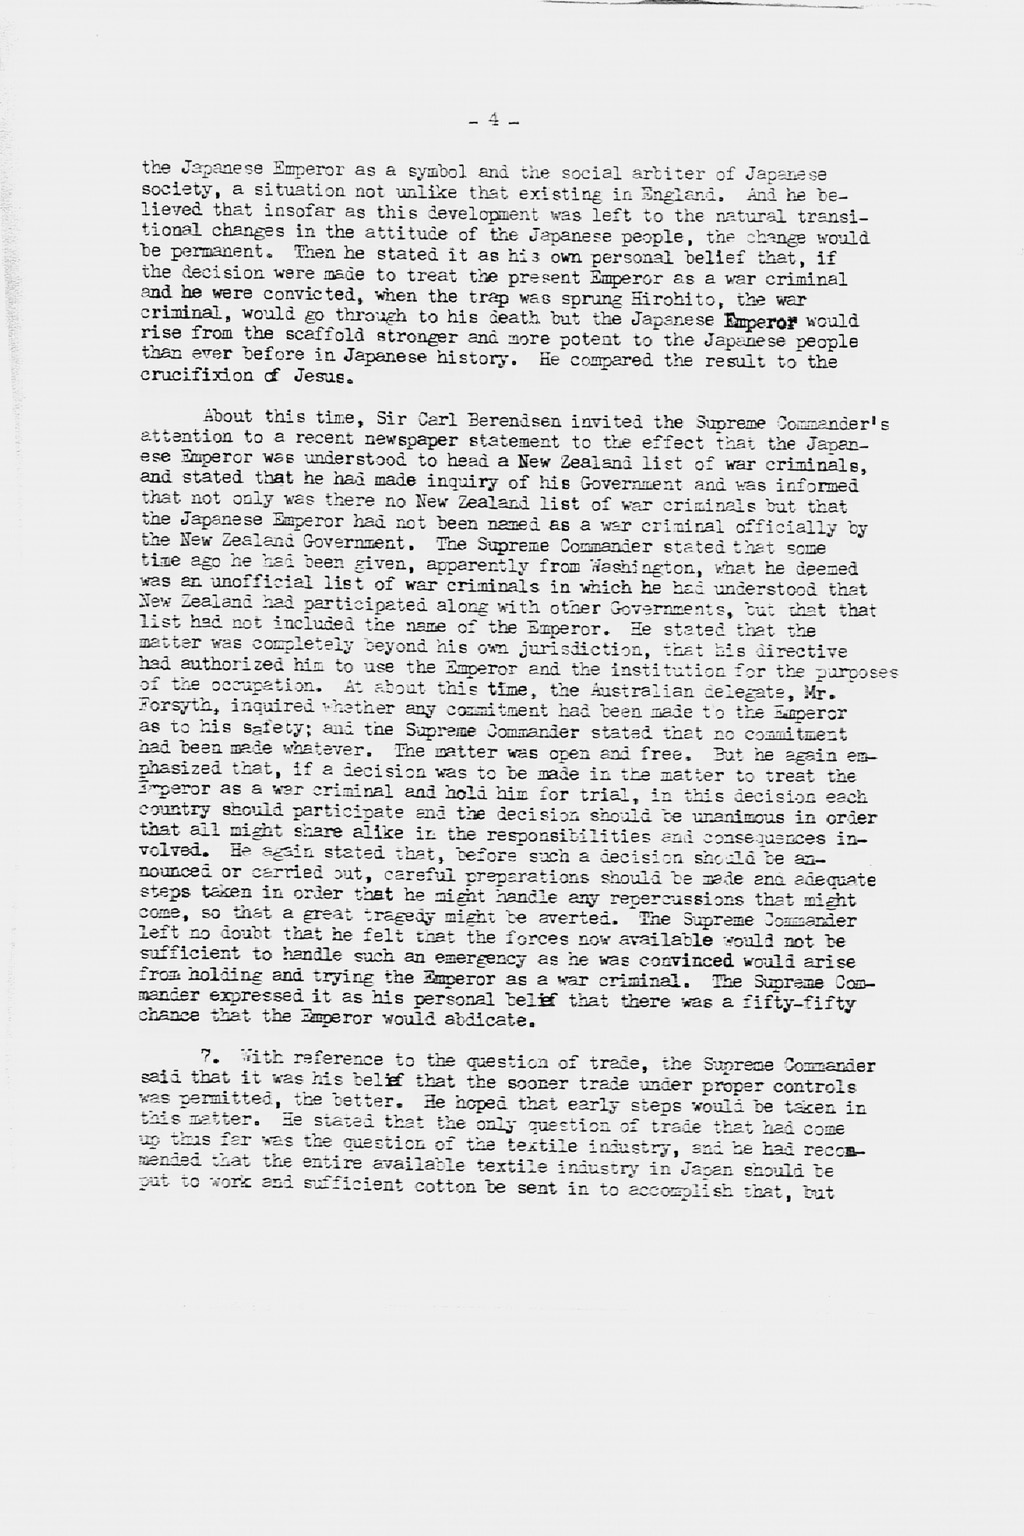 [Memorandum of Interview with General of the Army Douglas MacArthur Held on January 29, 1946](Larger image)